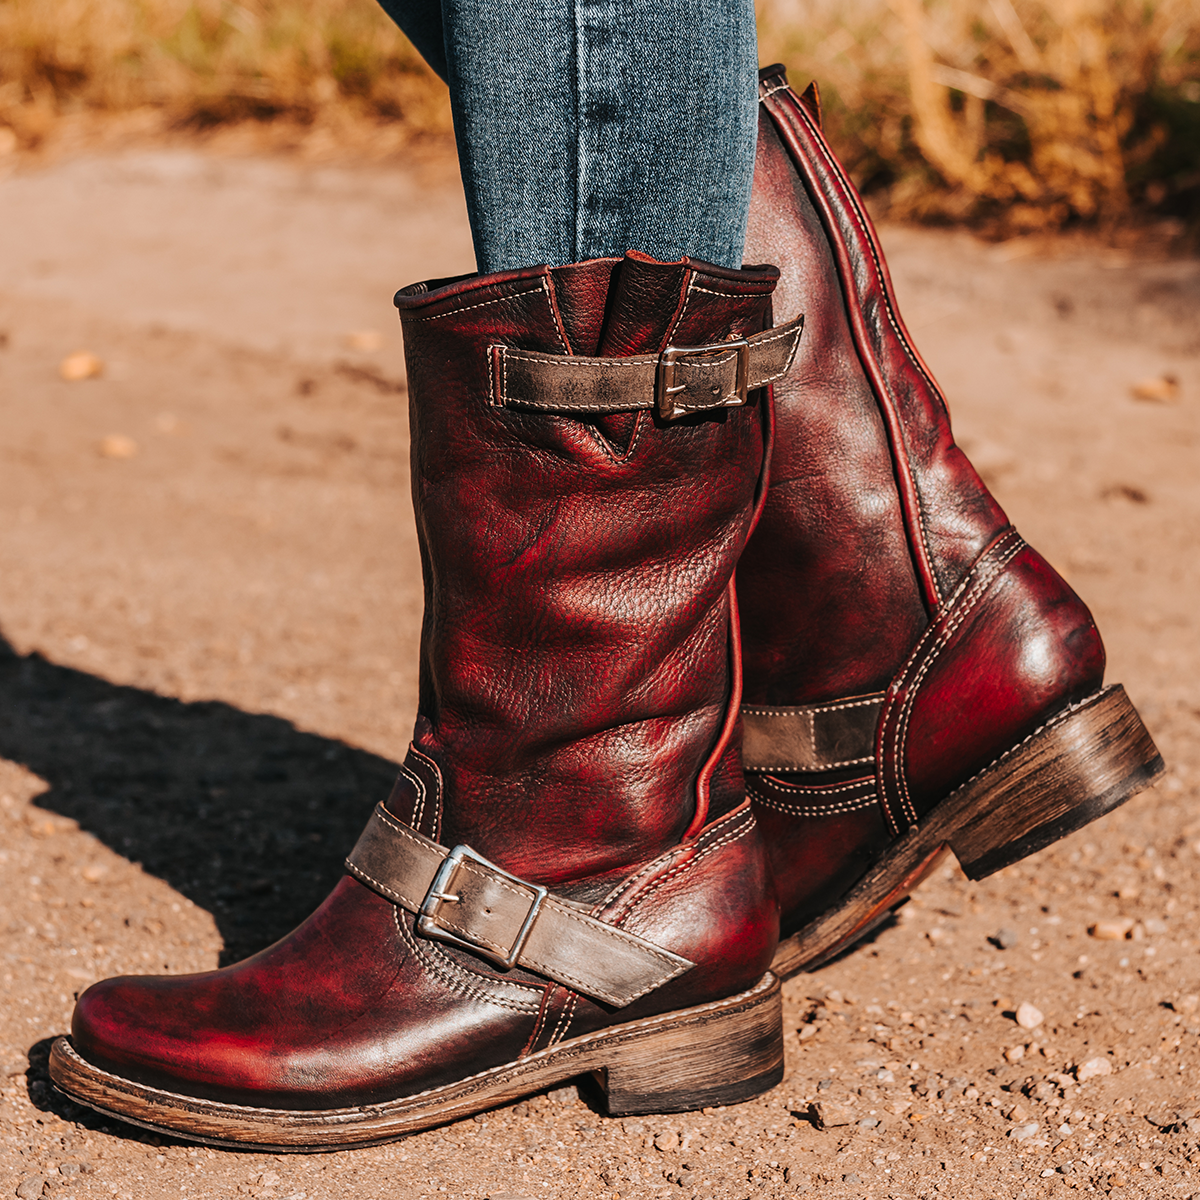 FREEBIRD women's Crosby wine featuring full grain leather, buckle straps, and a hidden pocket